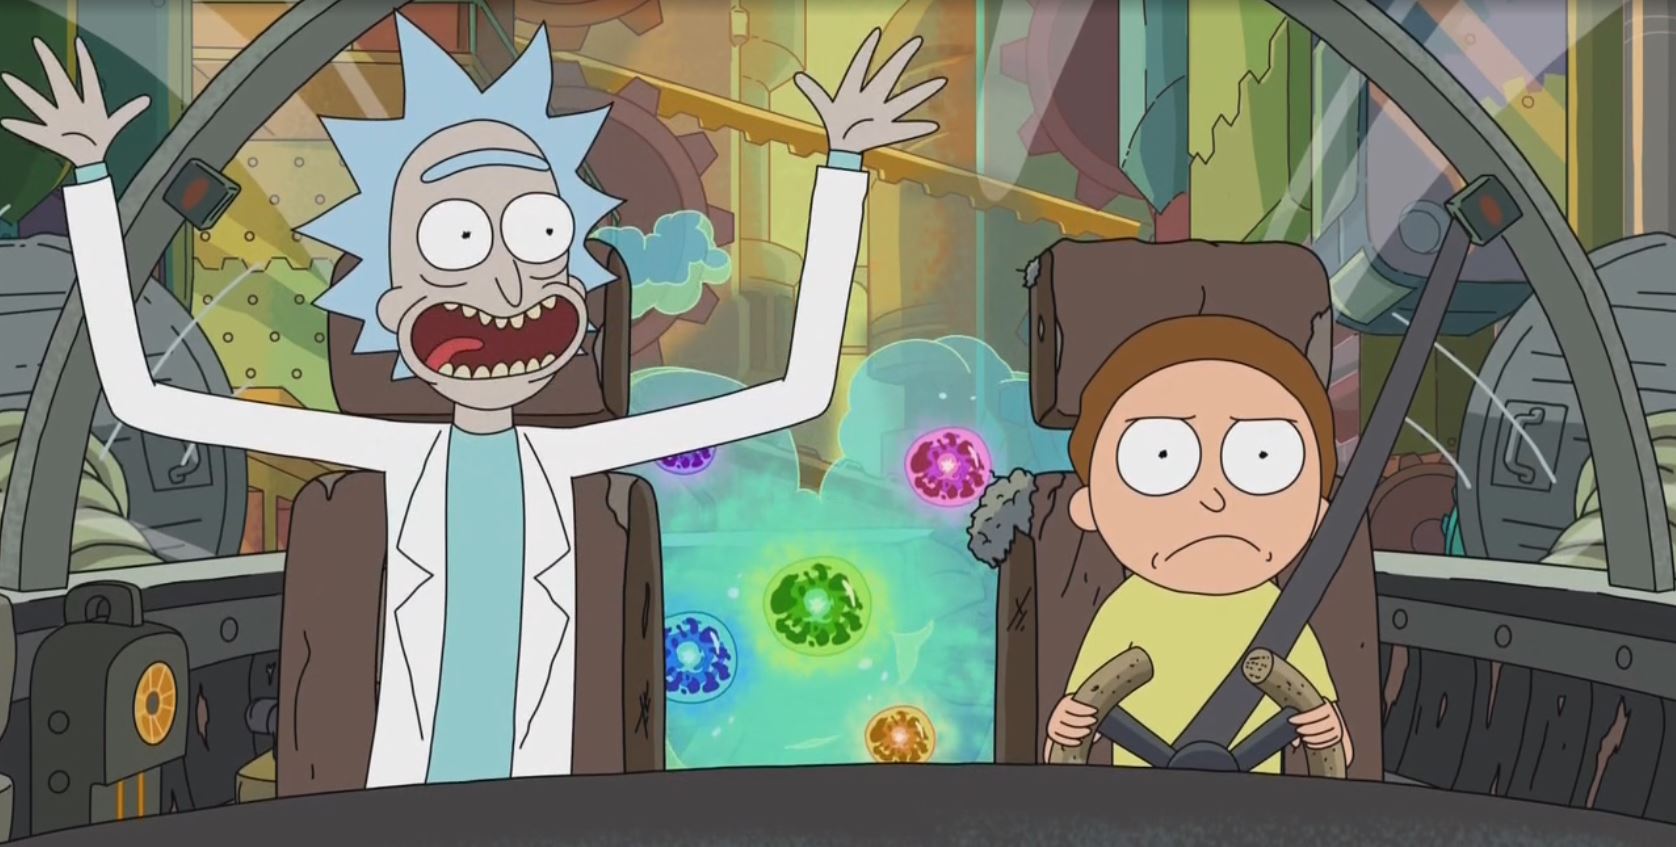 The Weird, Wonderful Worlds of Rick and Morty